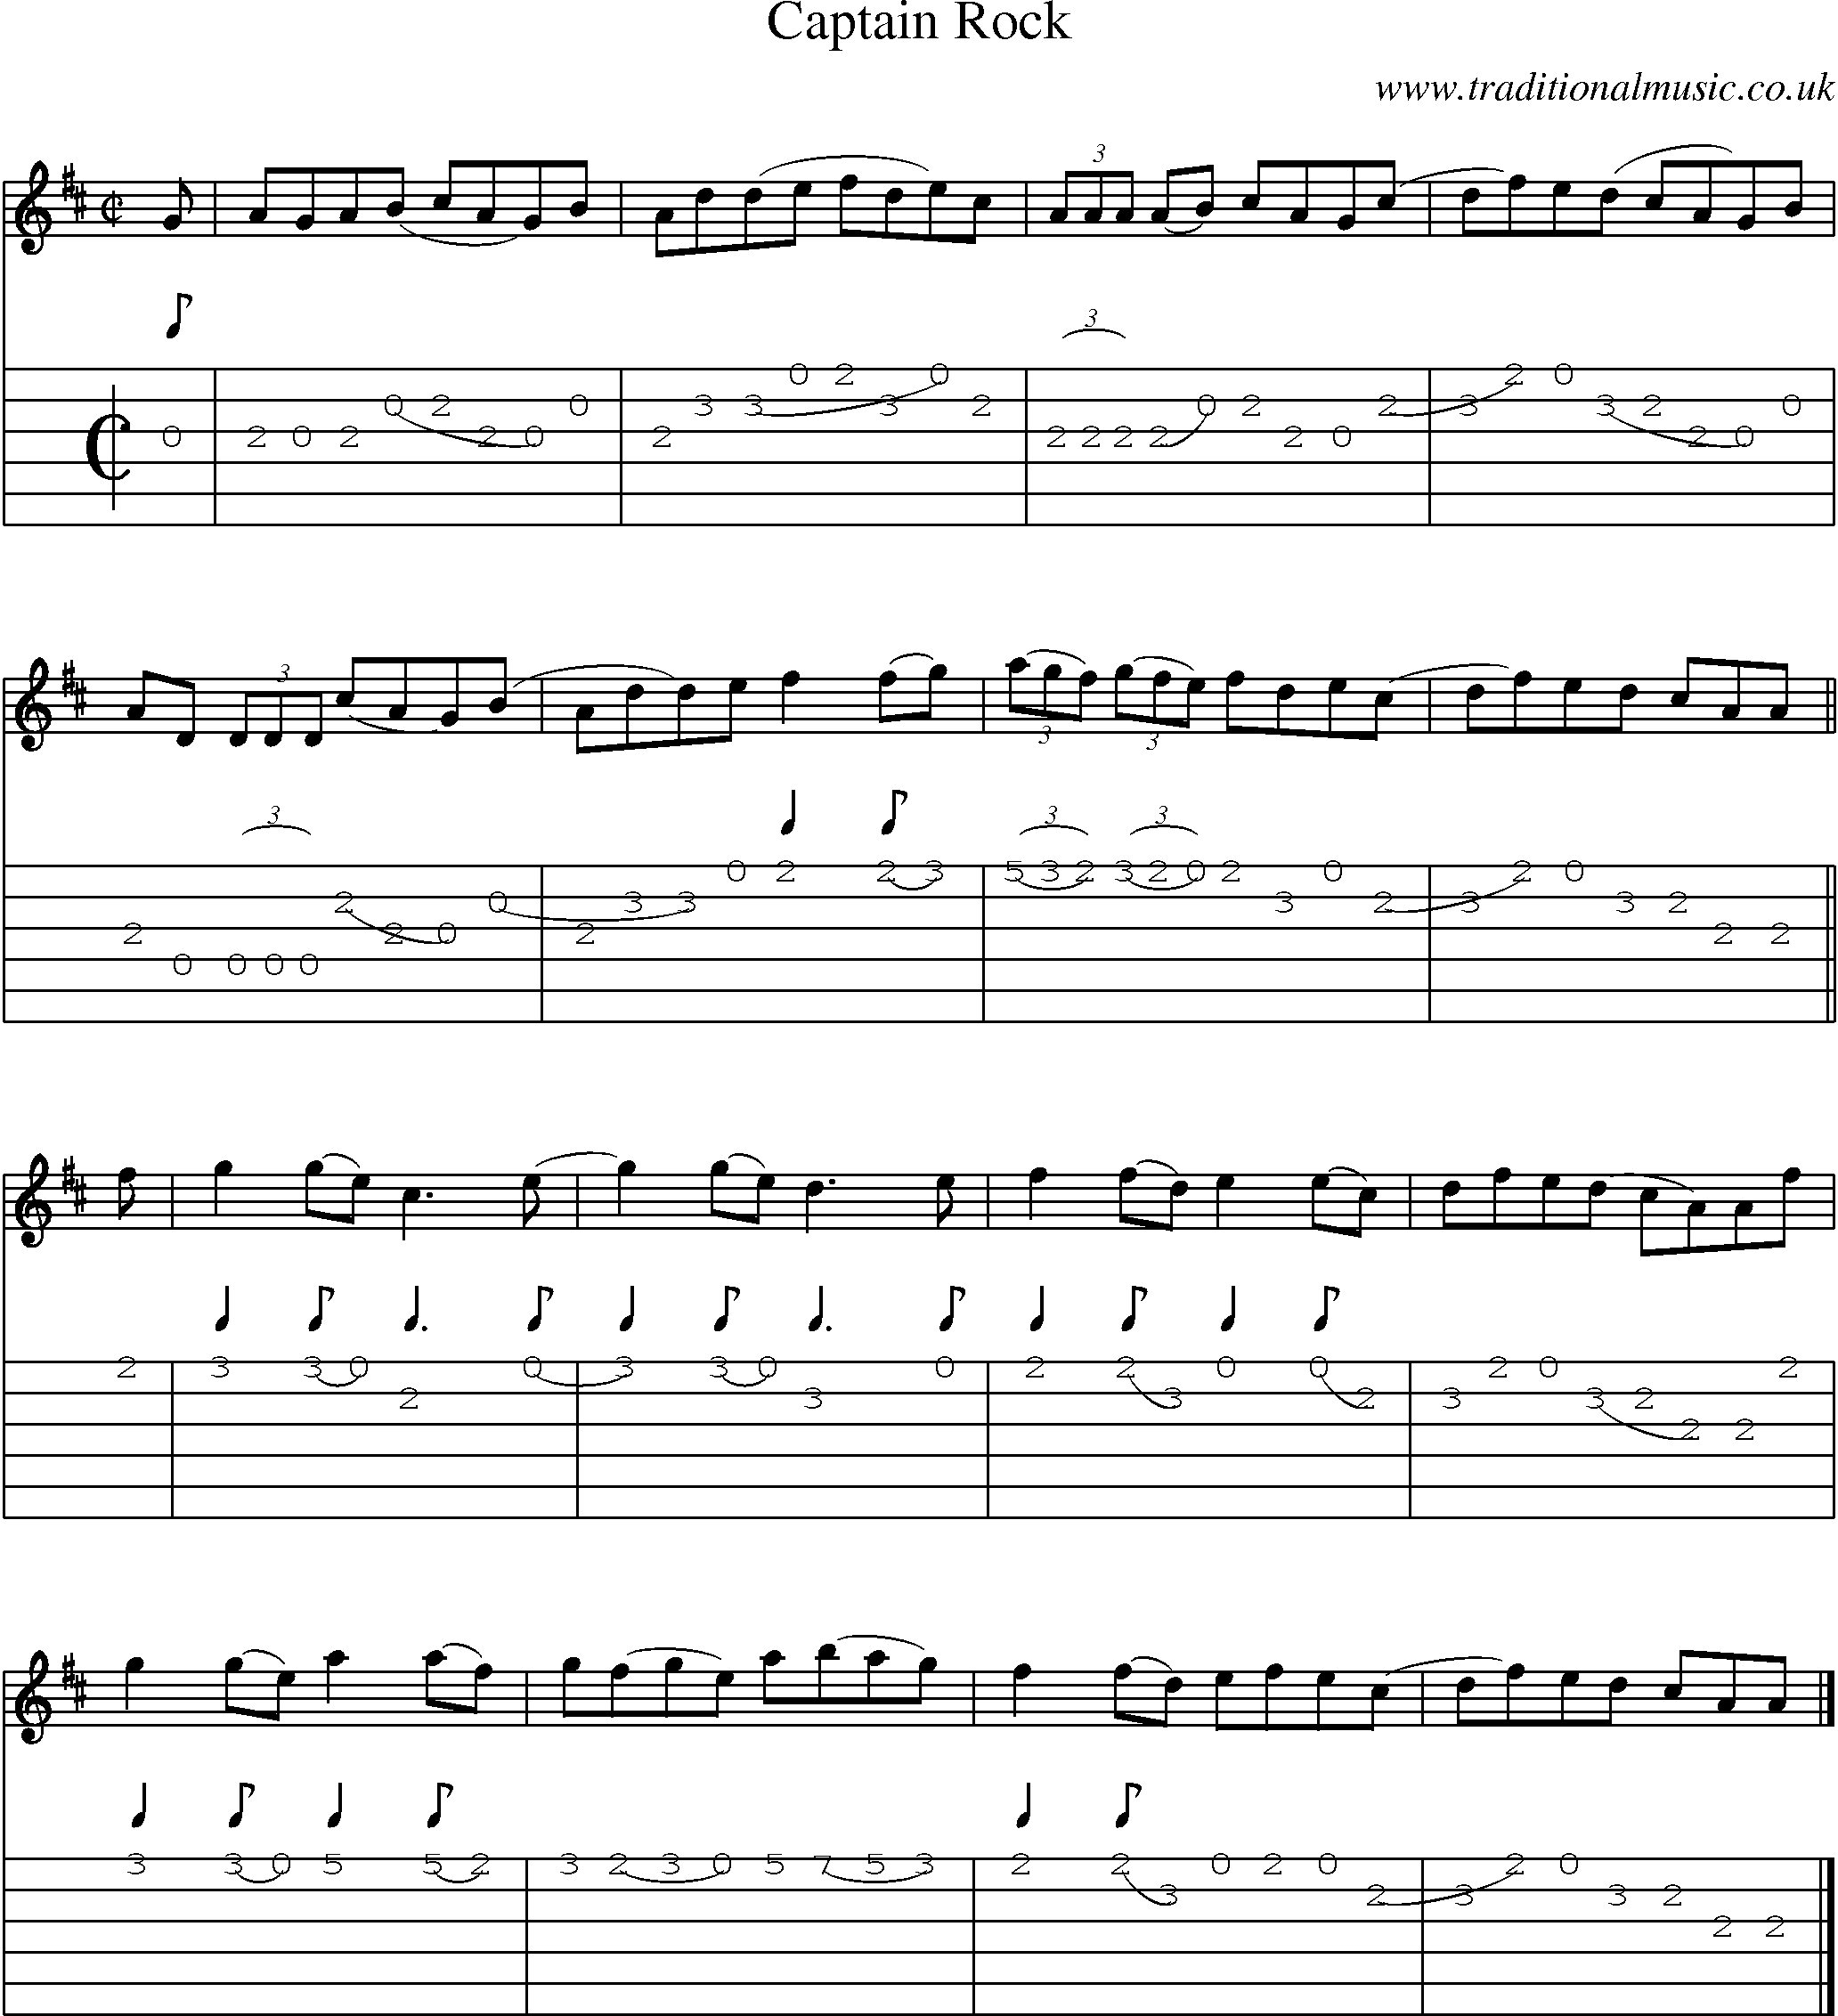 Music Score and Guitar Tabs for Captain Rock